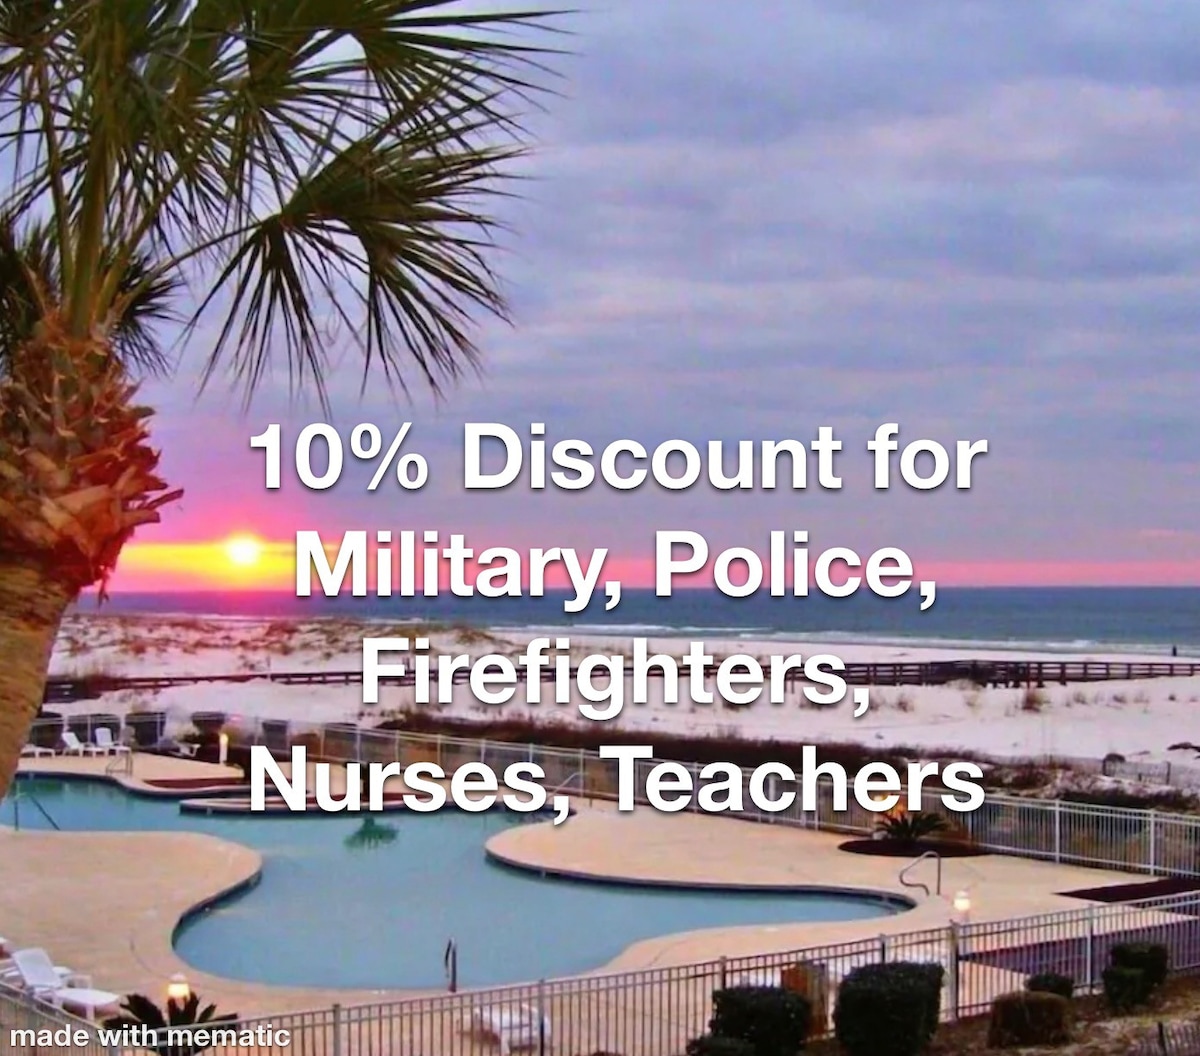 BEST DEAL in Gulf Shores (2/2 on the beach!)